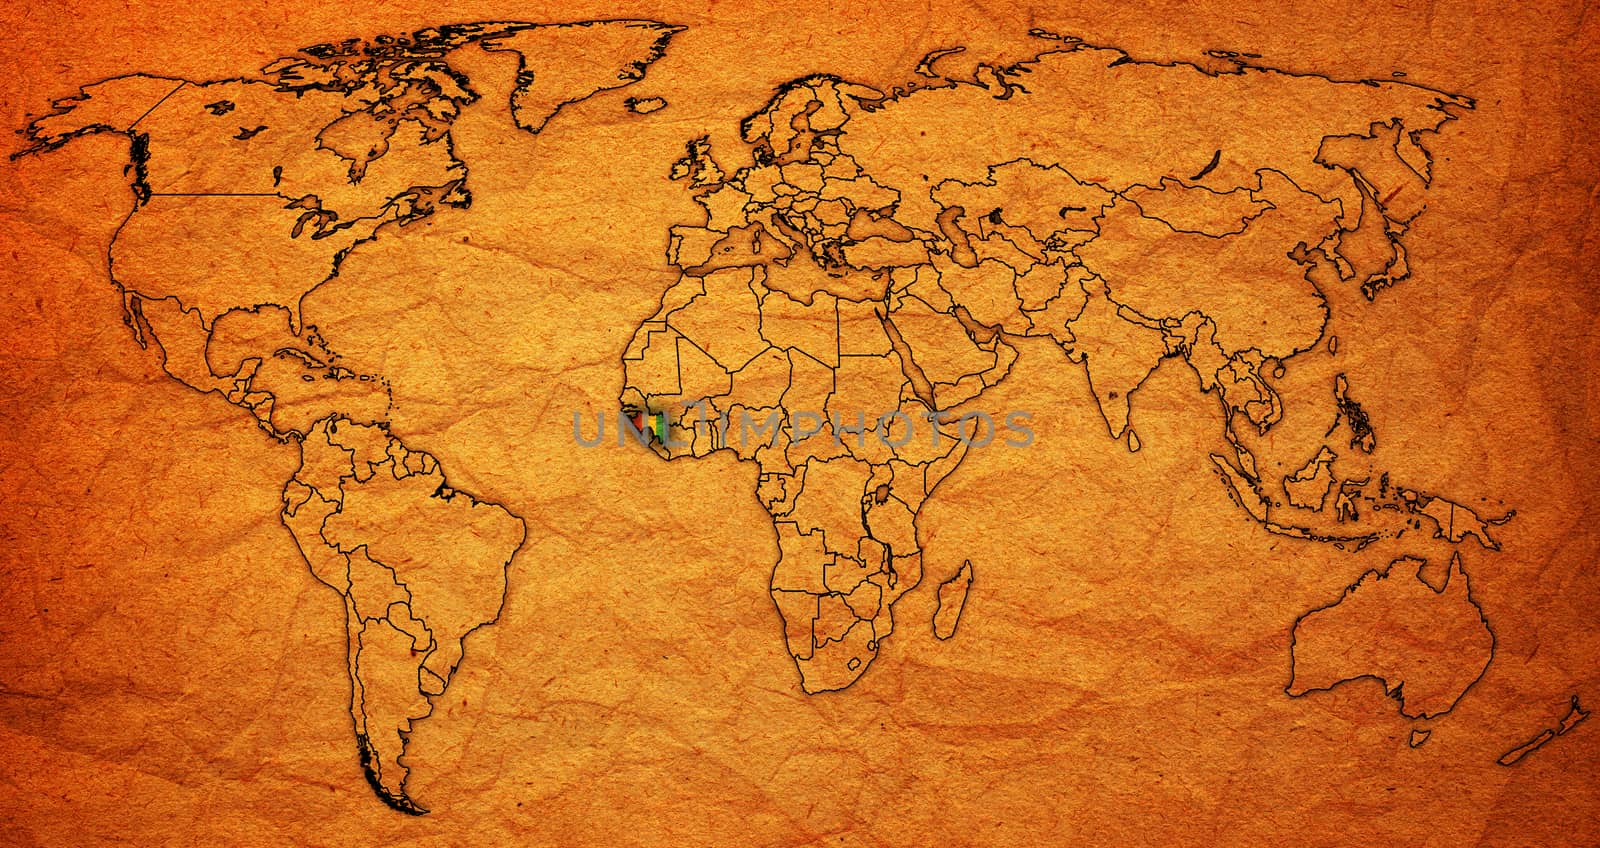 guinea territory on actual world map by michal812